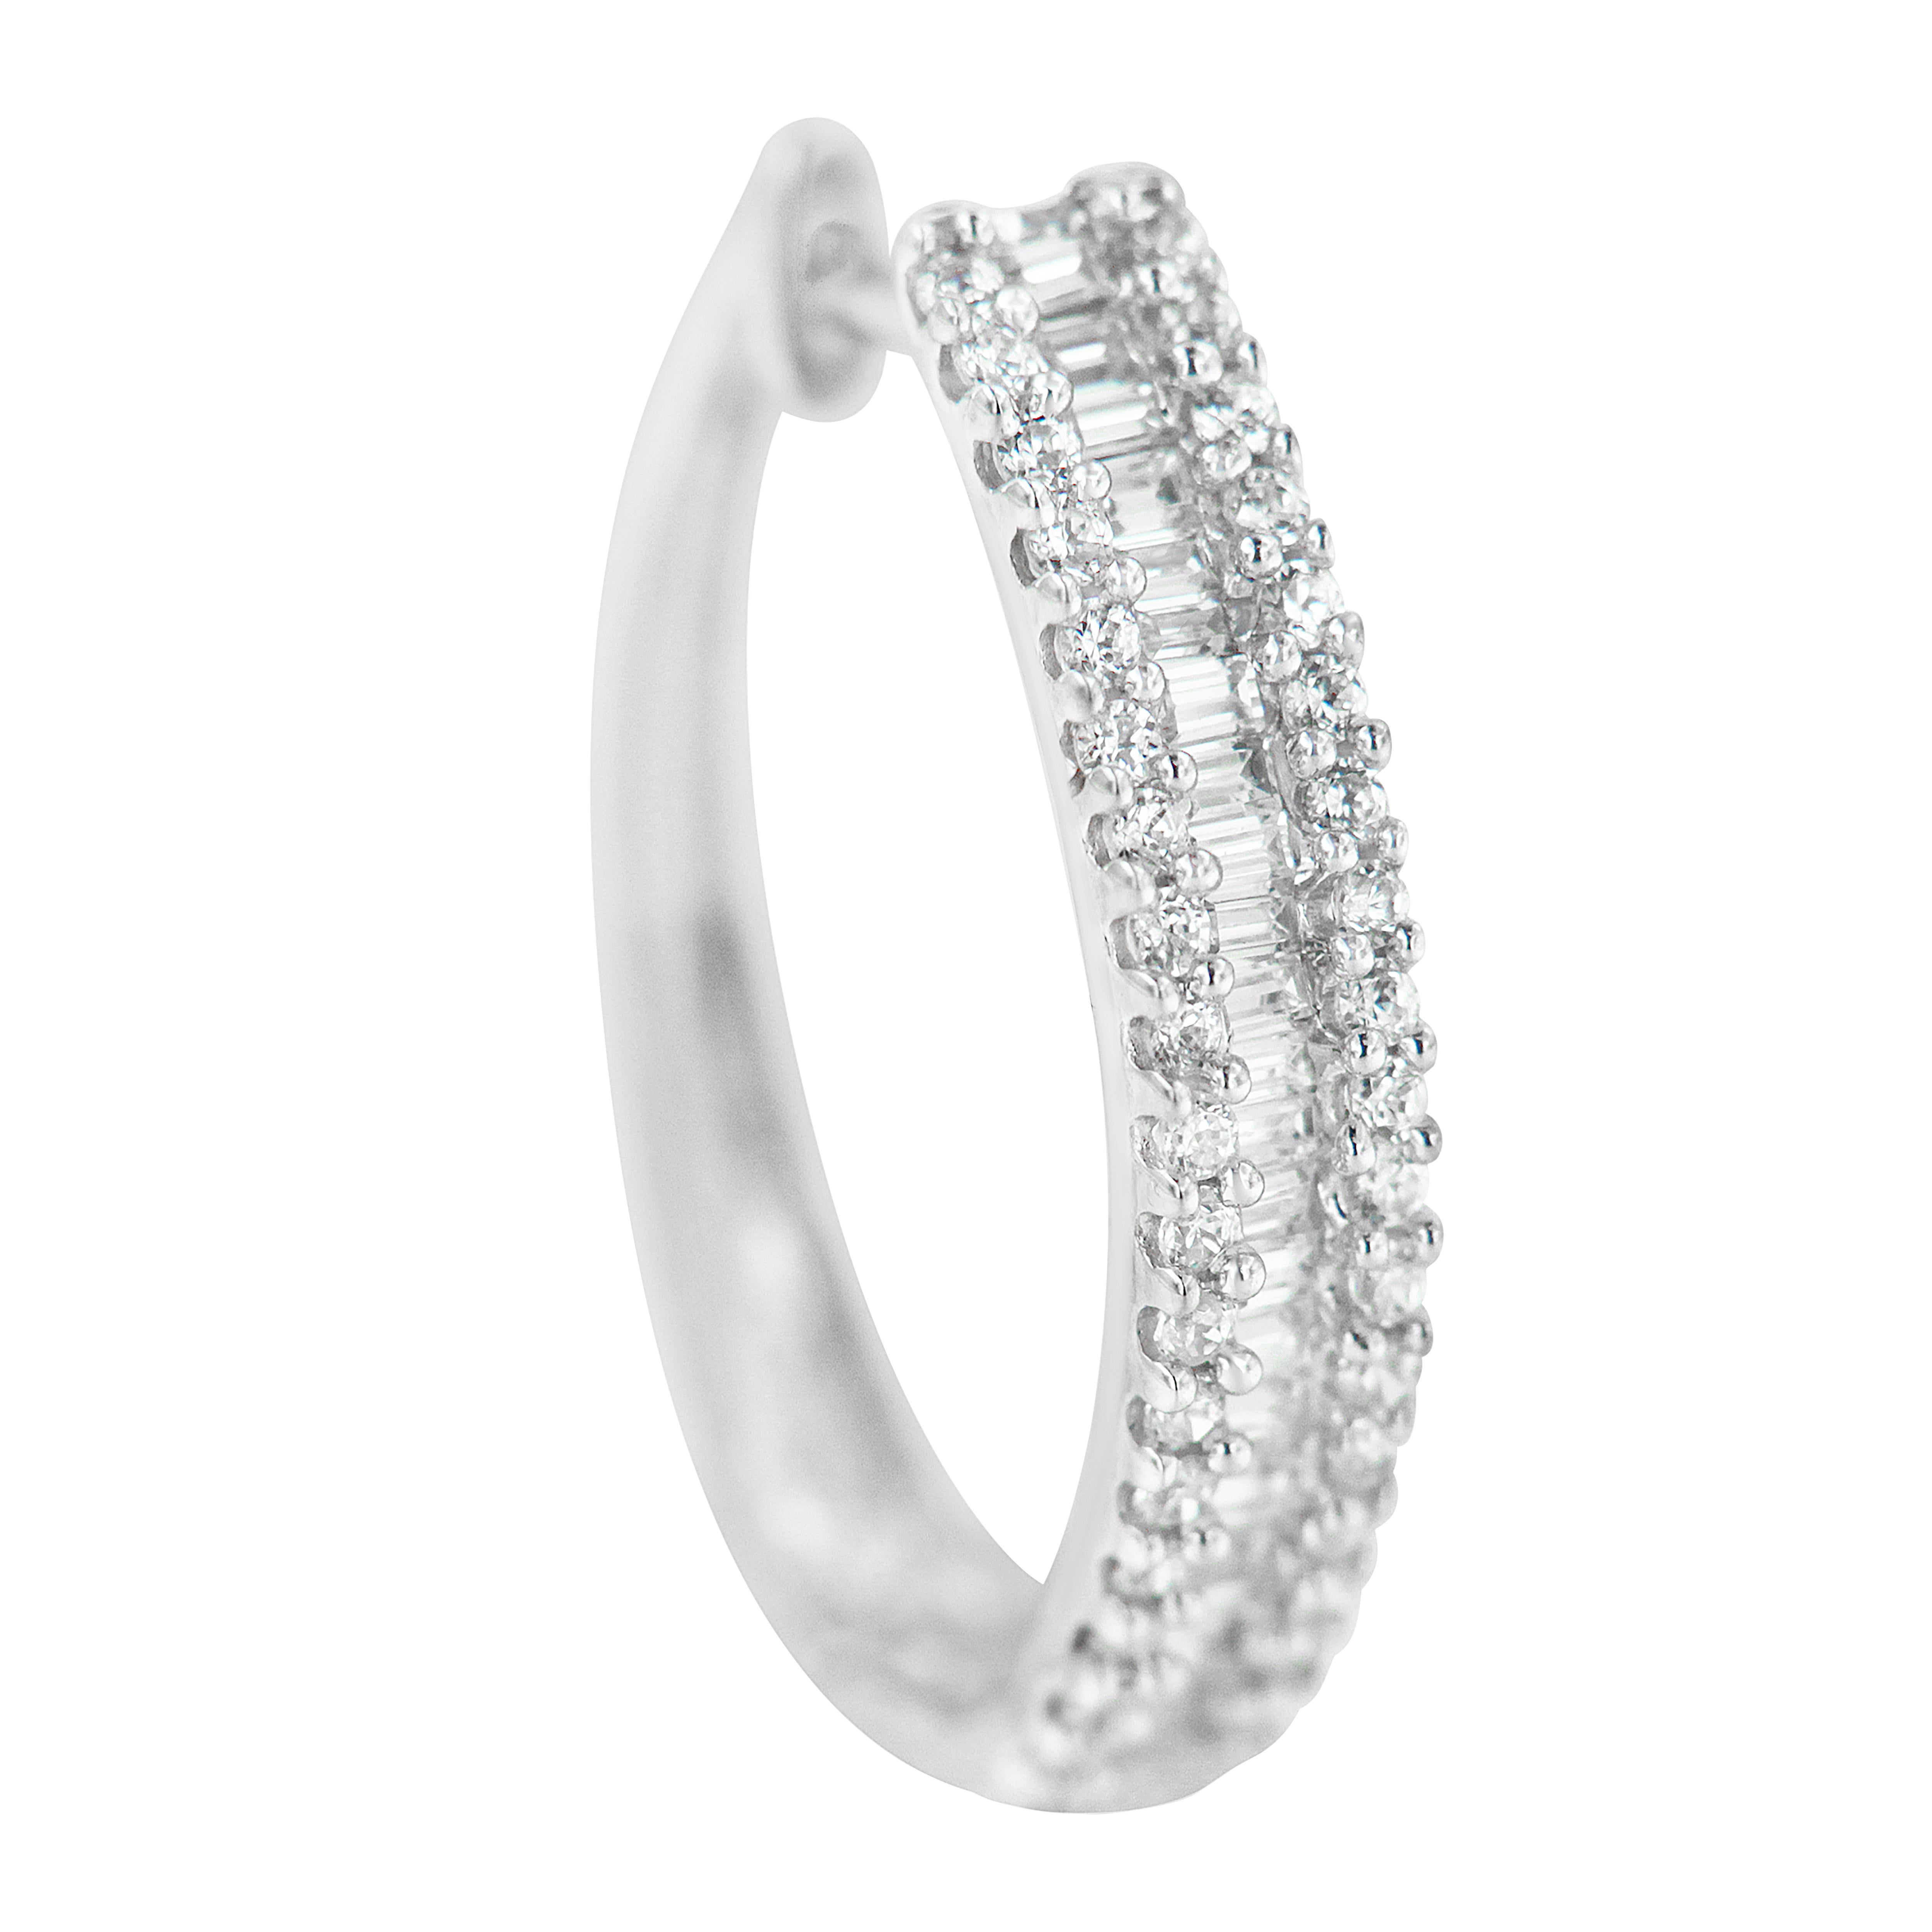 Three rows of diamonds add an eye catching sparkle to this classic hoop earring design. Fashioned in 10k white gold and with 3/4ct TDW of diamonds, these earrings are a great piece to have. A row of baguette cut diamonds runs down the middle and is